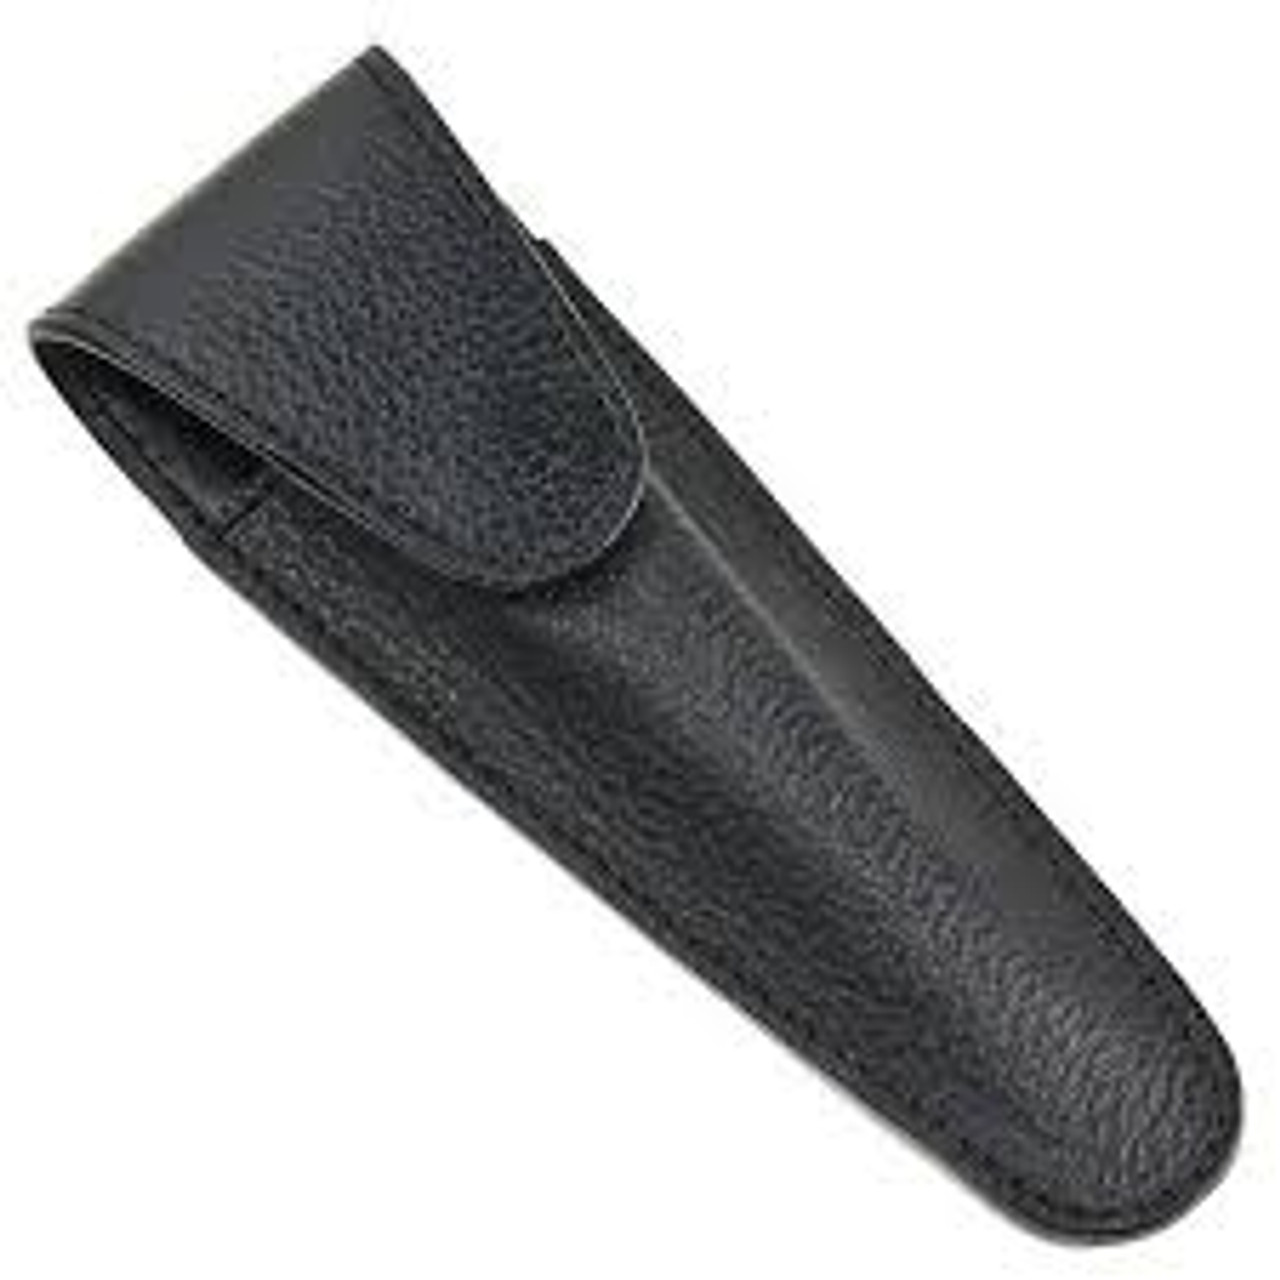 Leather Razor Protective/Travel Case for Fusion, Mach 3 & Long Handle ...